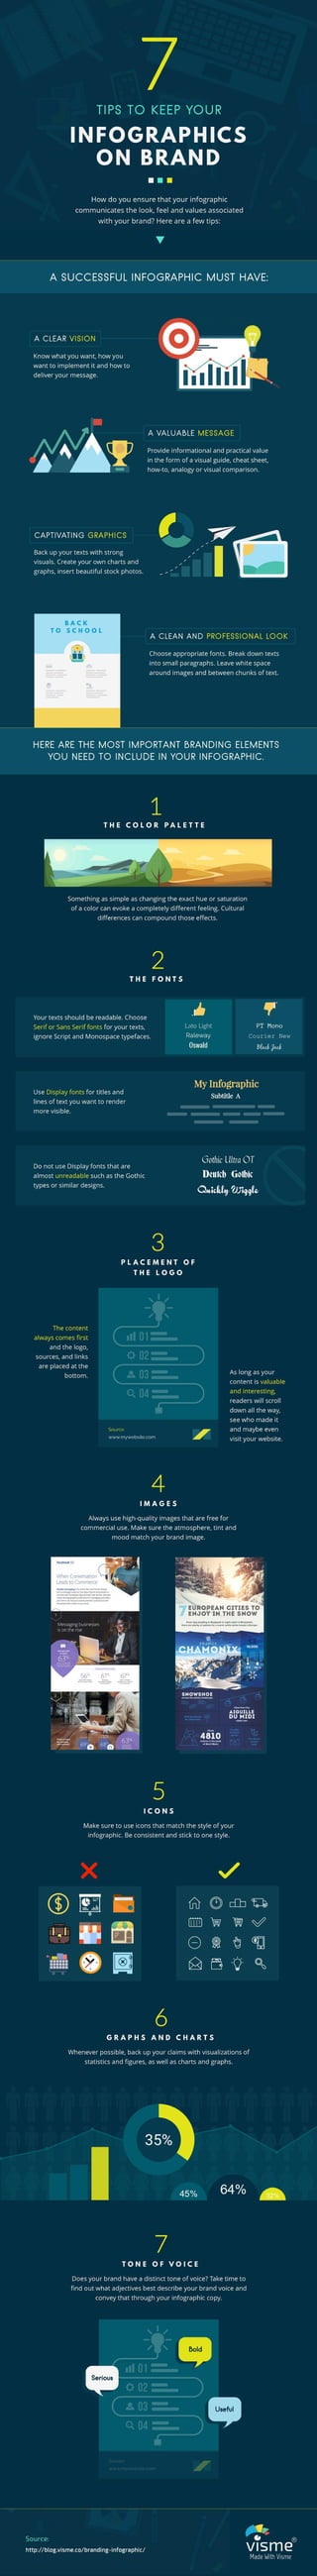 7 Tips To Keep Your Infographic On Brand